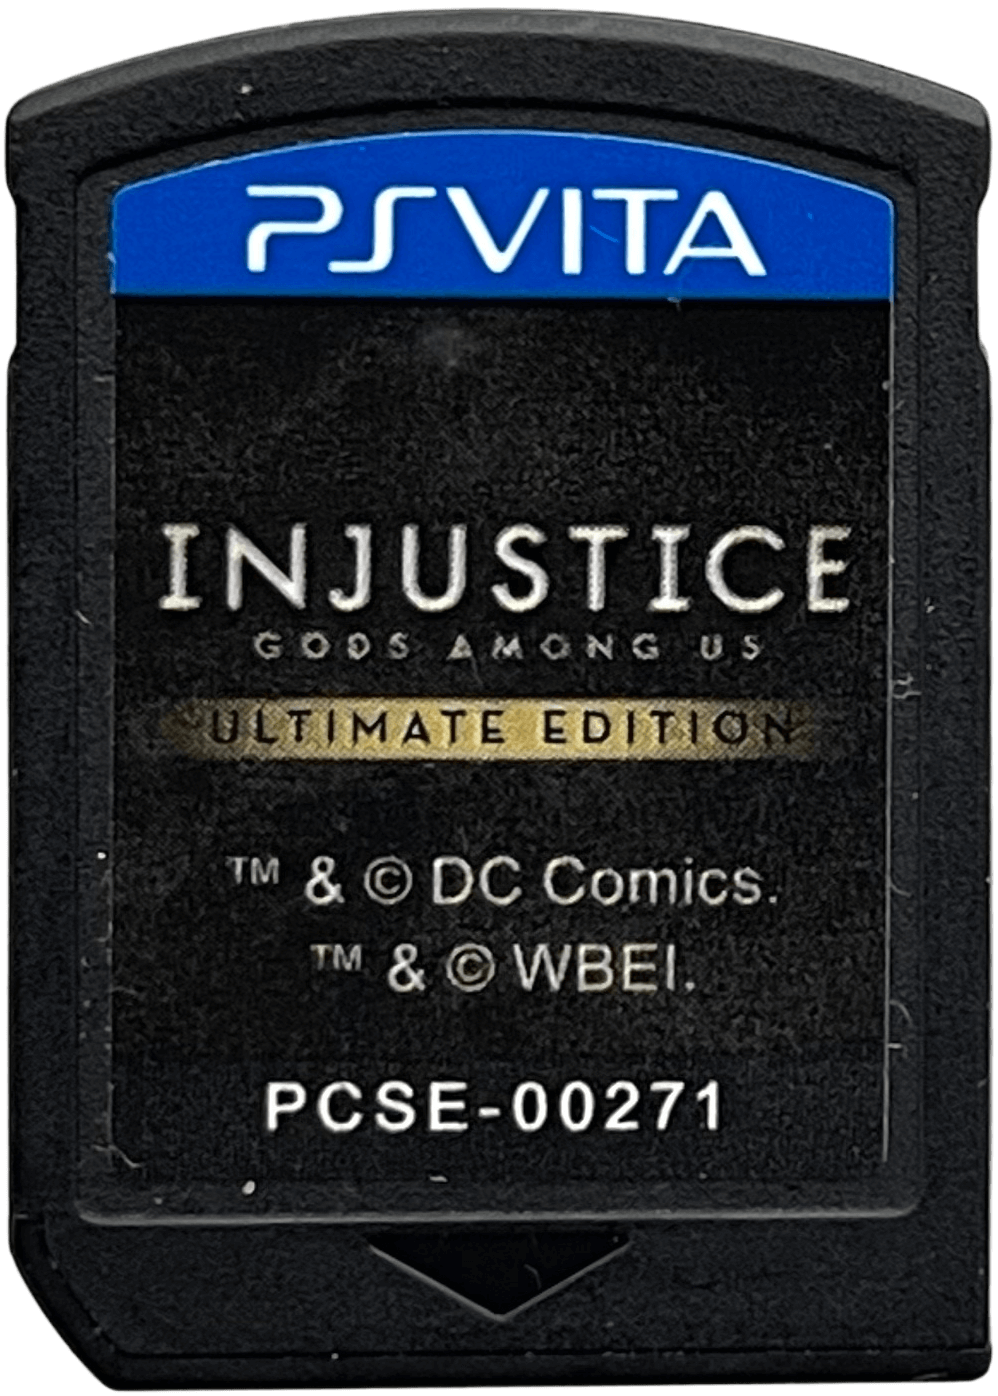 Injustice: Gods Among Us (Ultimate Edition) for PS Vita